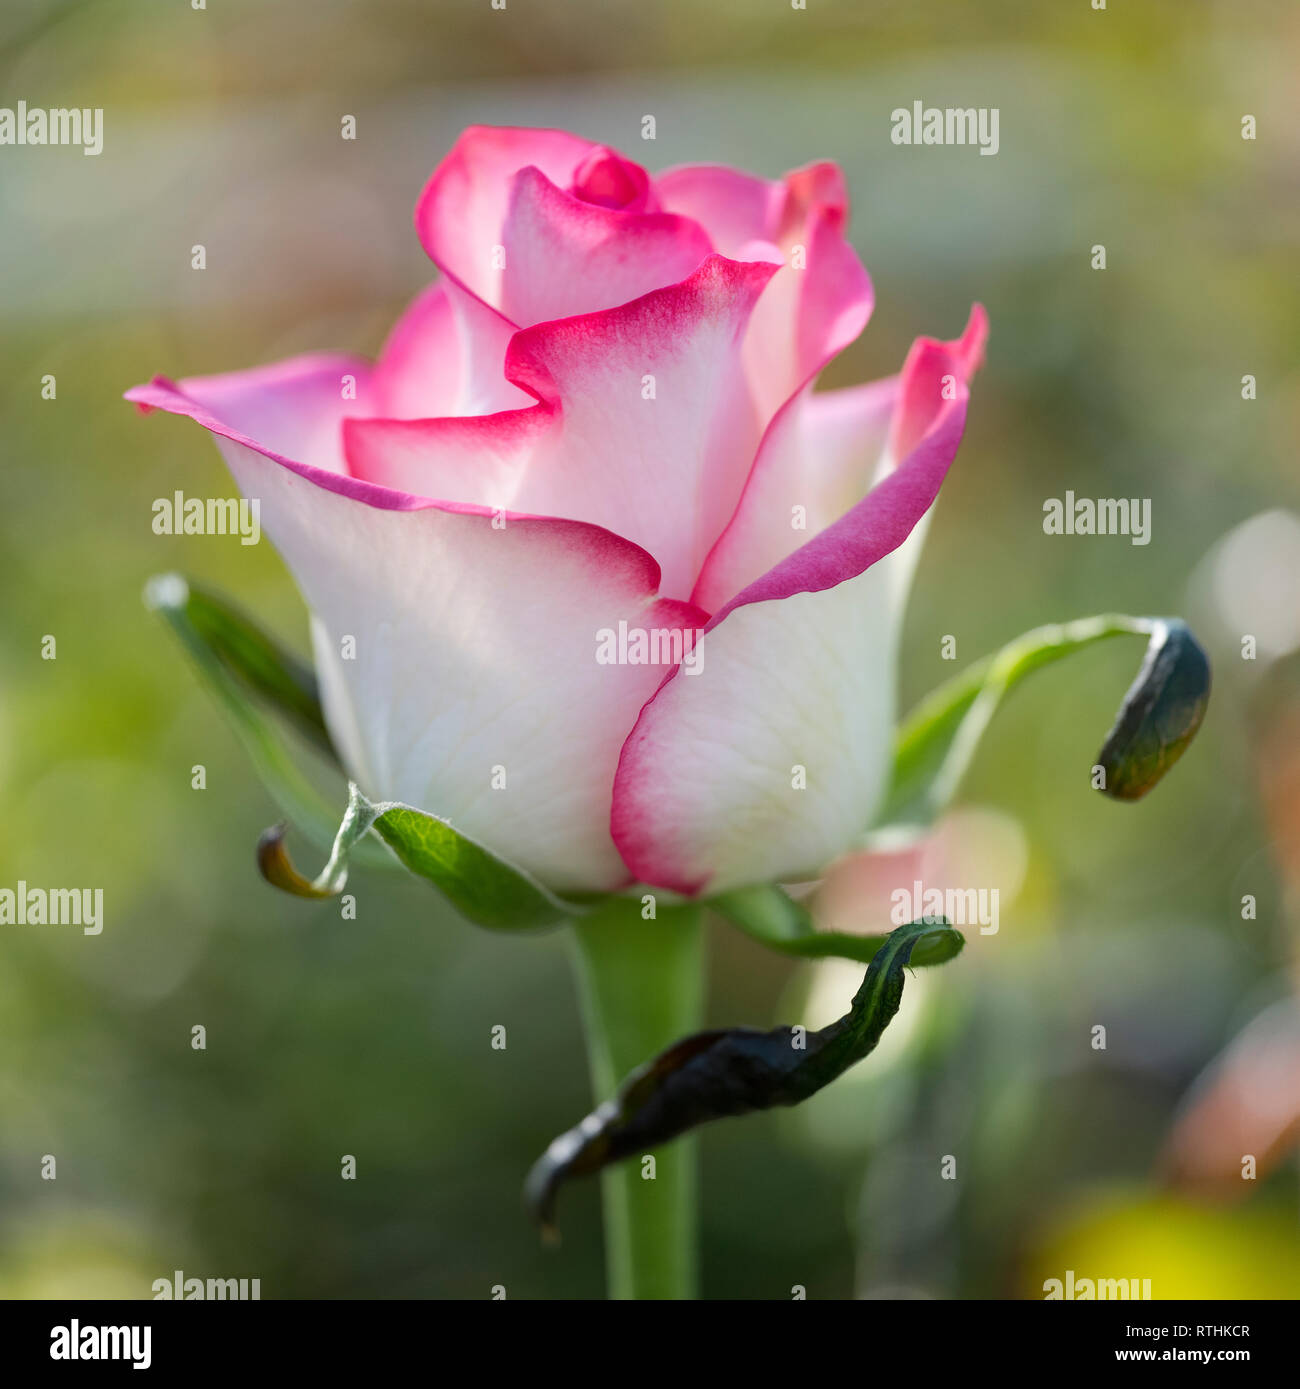 Dutch Rose High Resolution Stock Photography and Images - Alamy